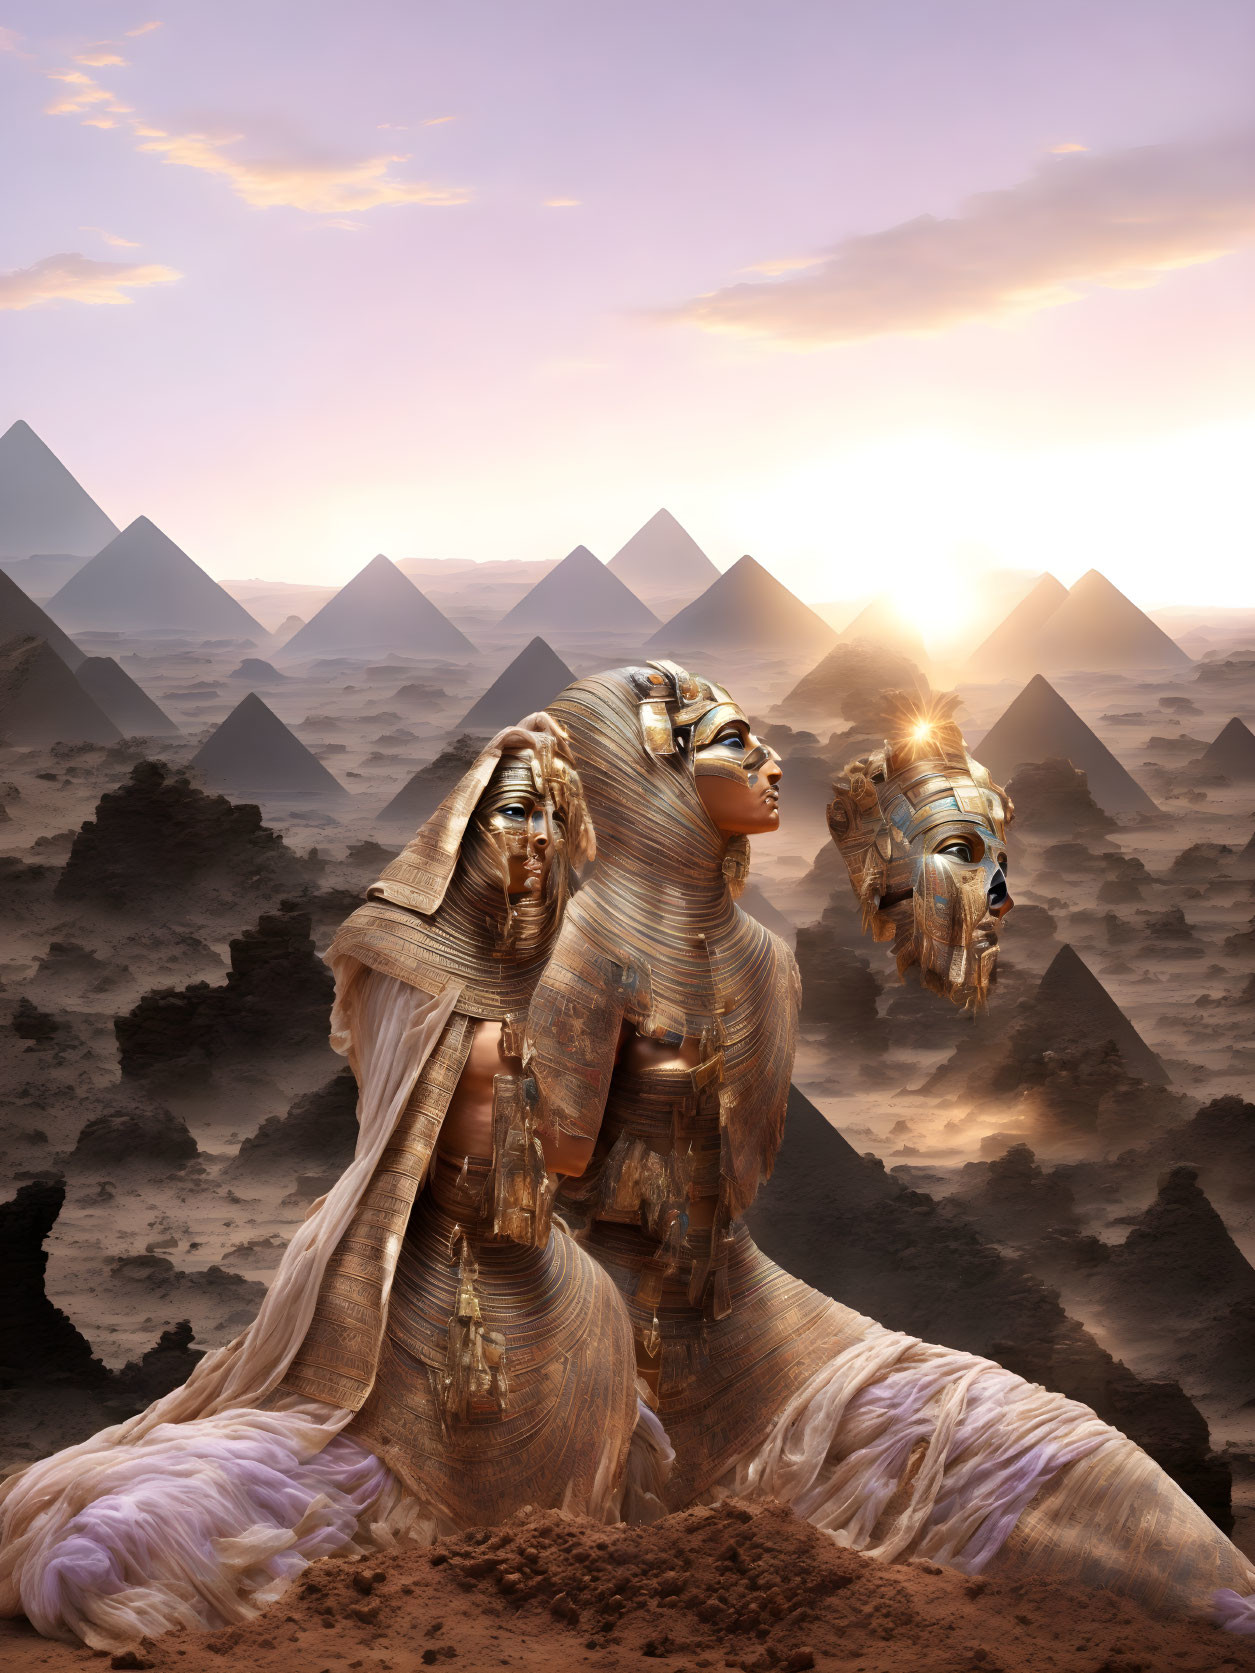 Ancient Egyptian-themed artwork with person in headdress and pyramids in desert landscape